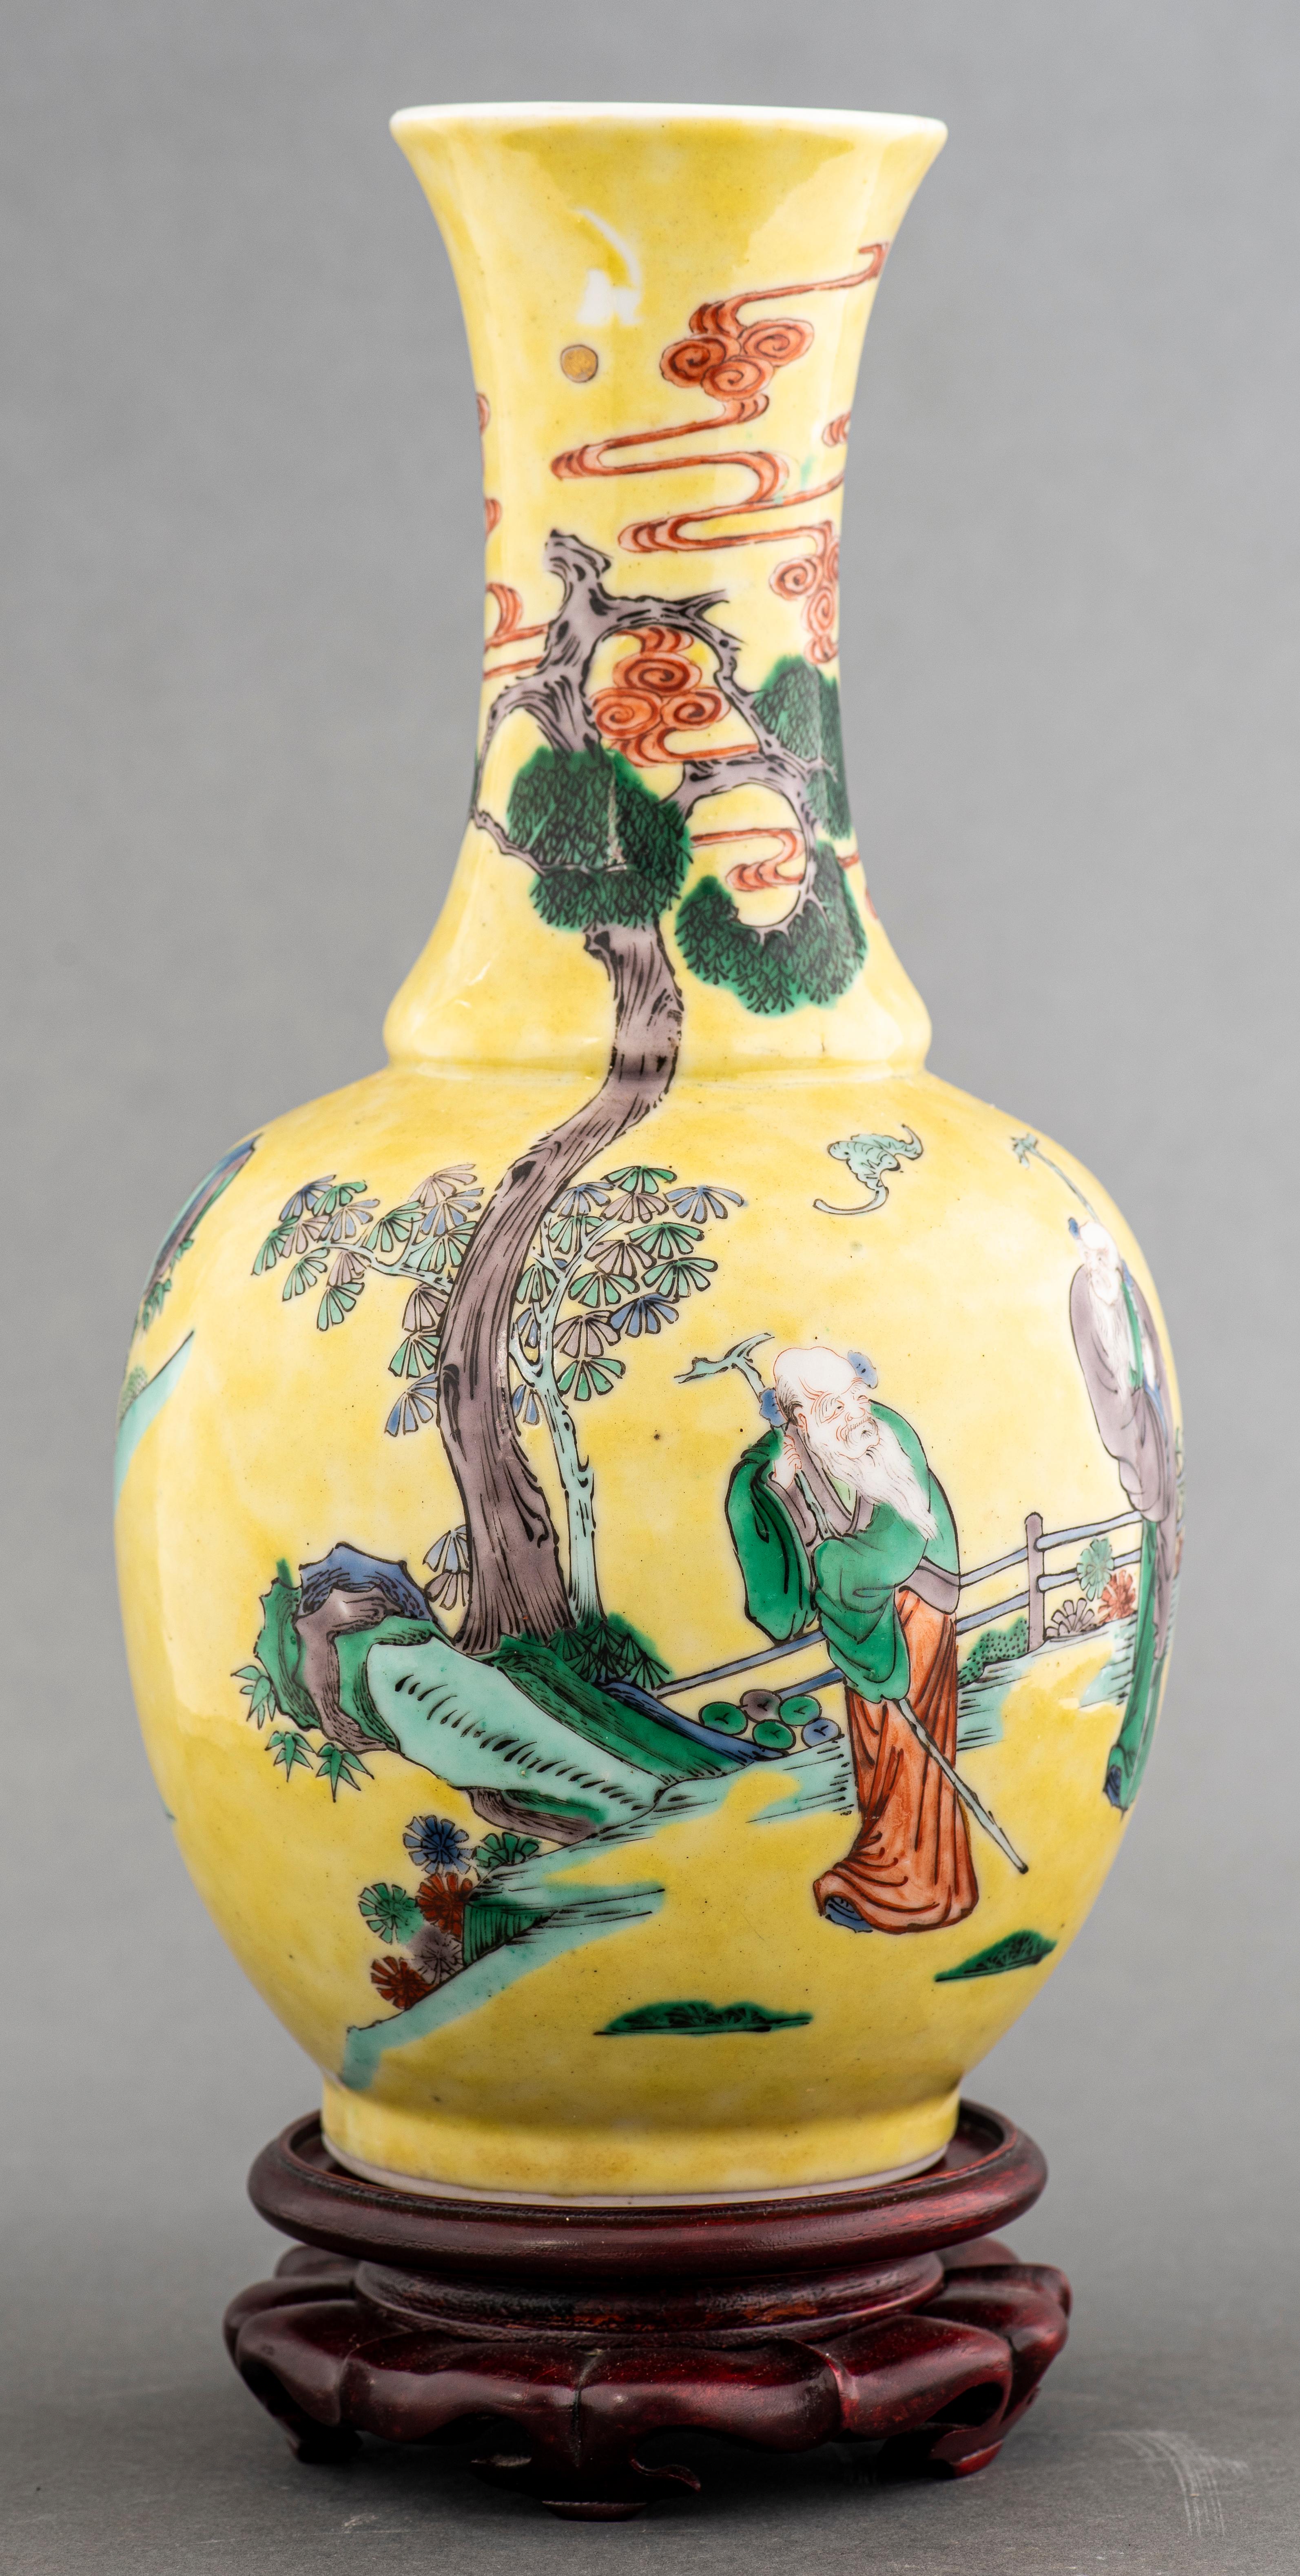 Chinese Famille Jaune baluster form vase with yellow ground, decorated with deities or other figures under auspicious motifs, including scrolling clouds and flying bats, mid 20th century, raised on wood stand. 
Dimensions: Vase: 11.25